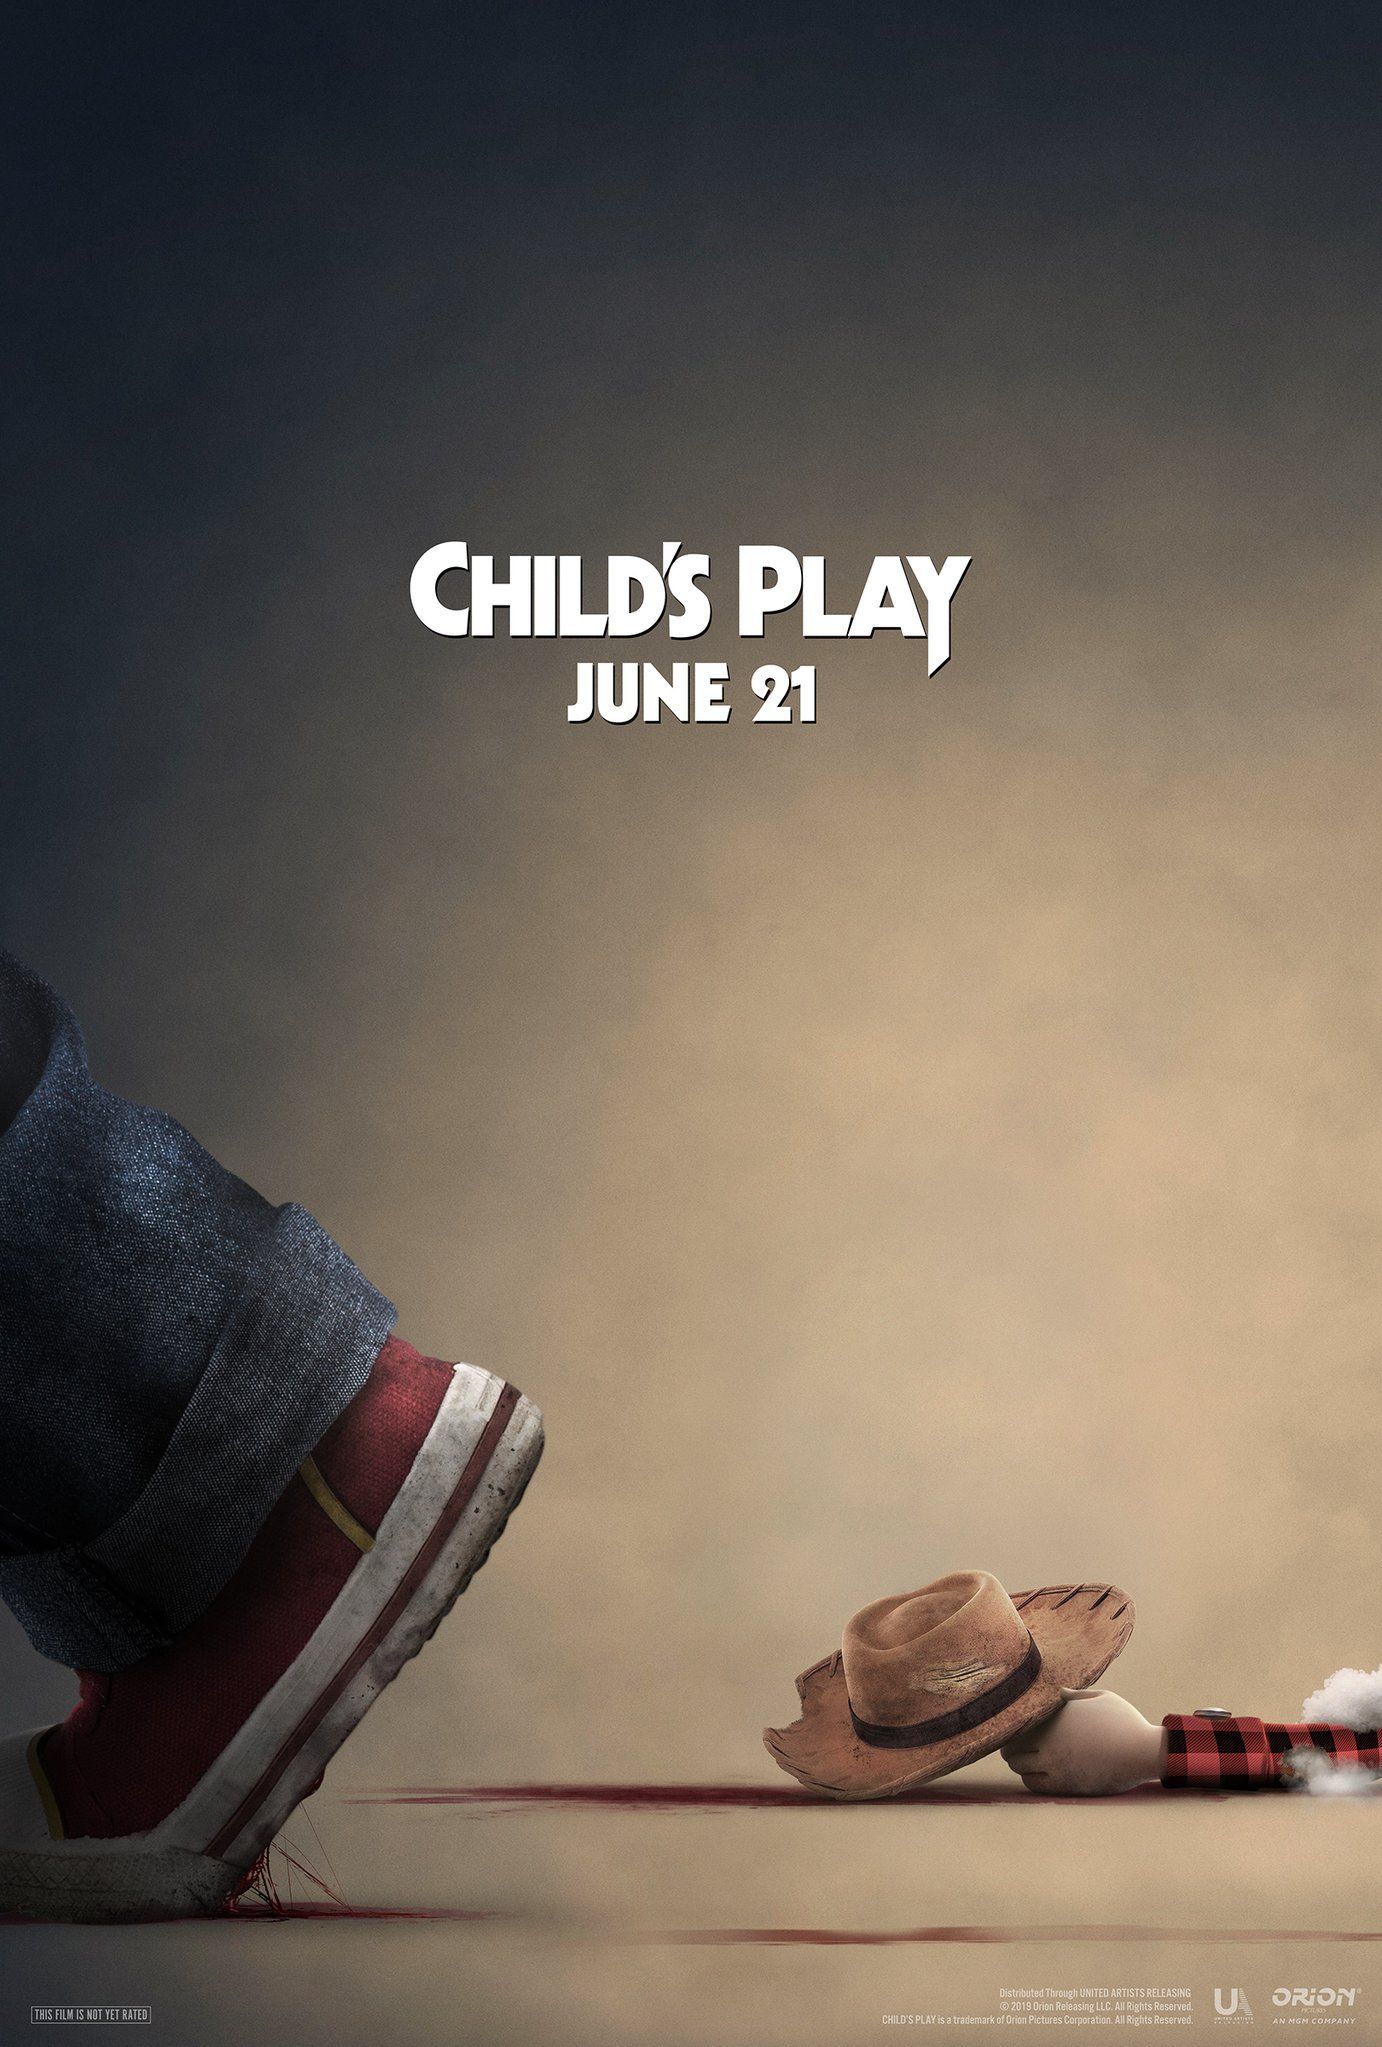 Child's Play remake poster Toy Story 4 spoof